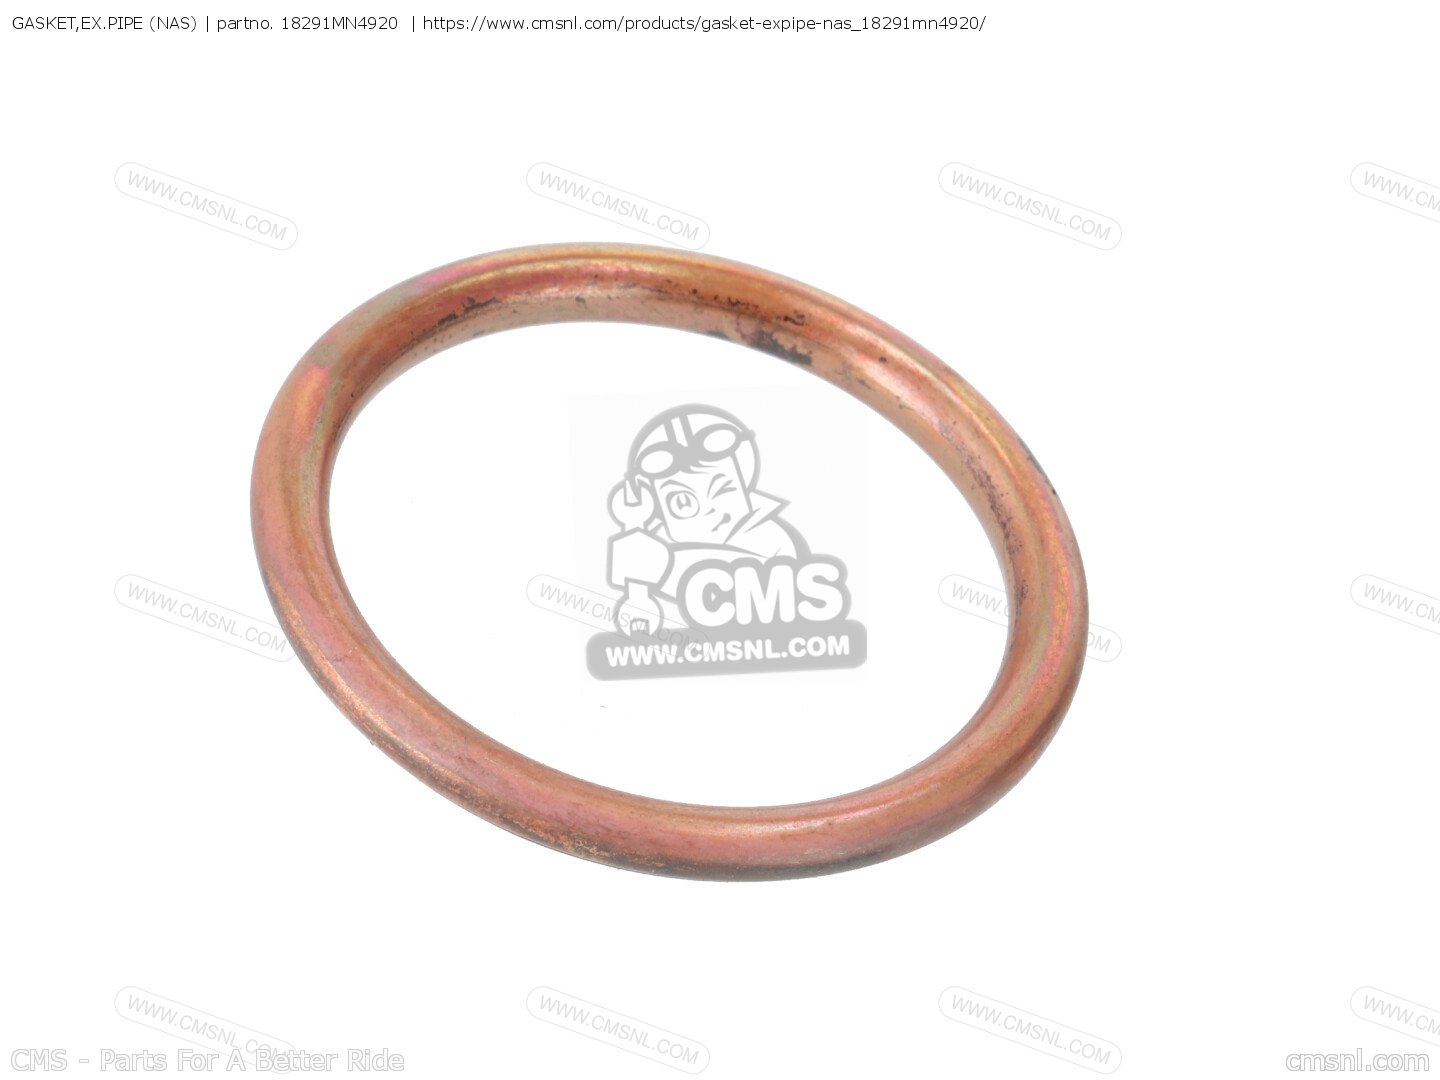 See List #16-6061 18291-MN4-920 or 18291-634-00 Set of 2 Honda Exhaust Gaskets